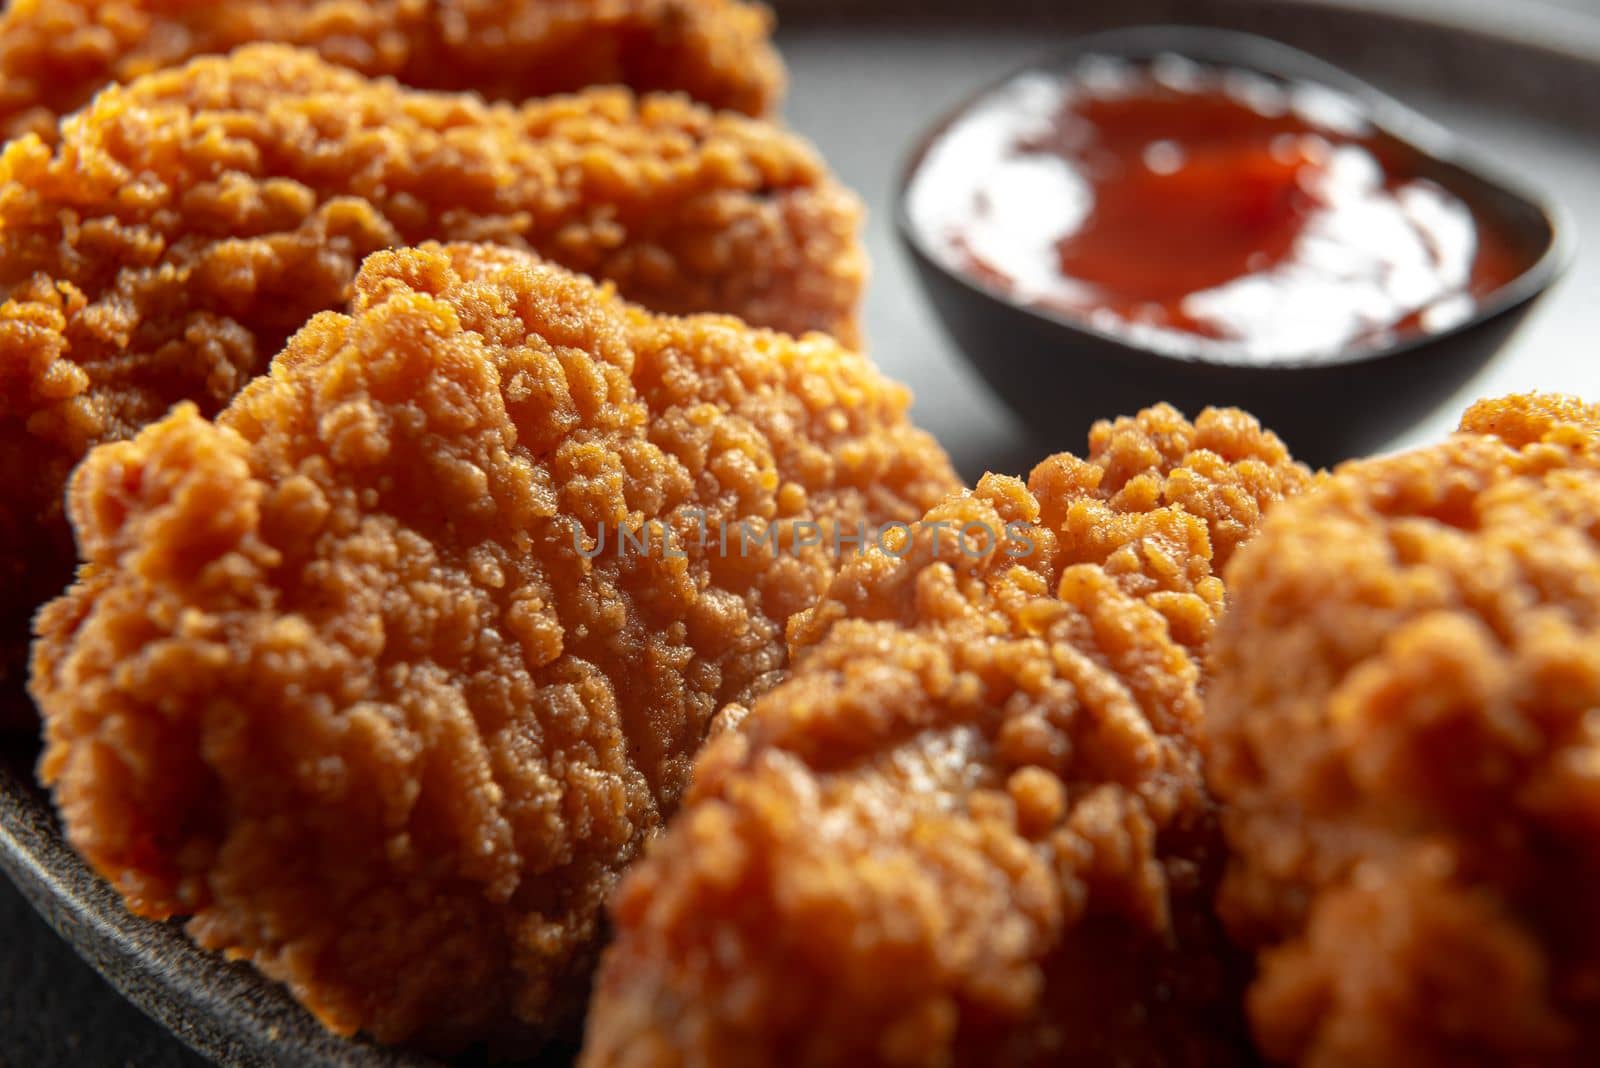 Fried chicken fillet on a dark background. Fried chicken wings as in KFC at home close-up